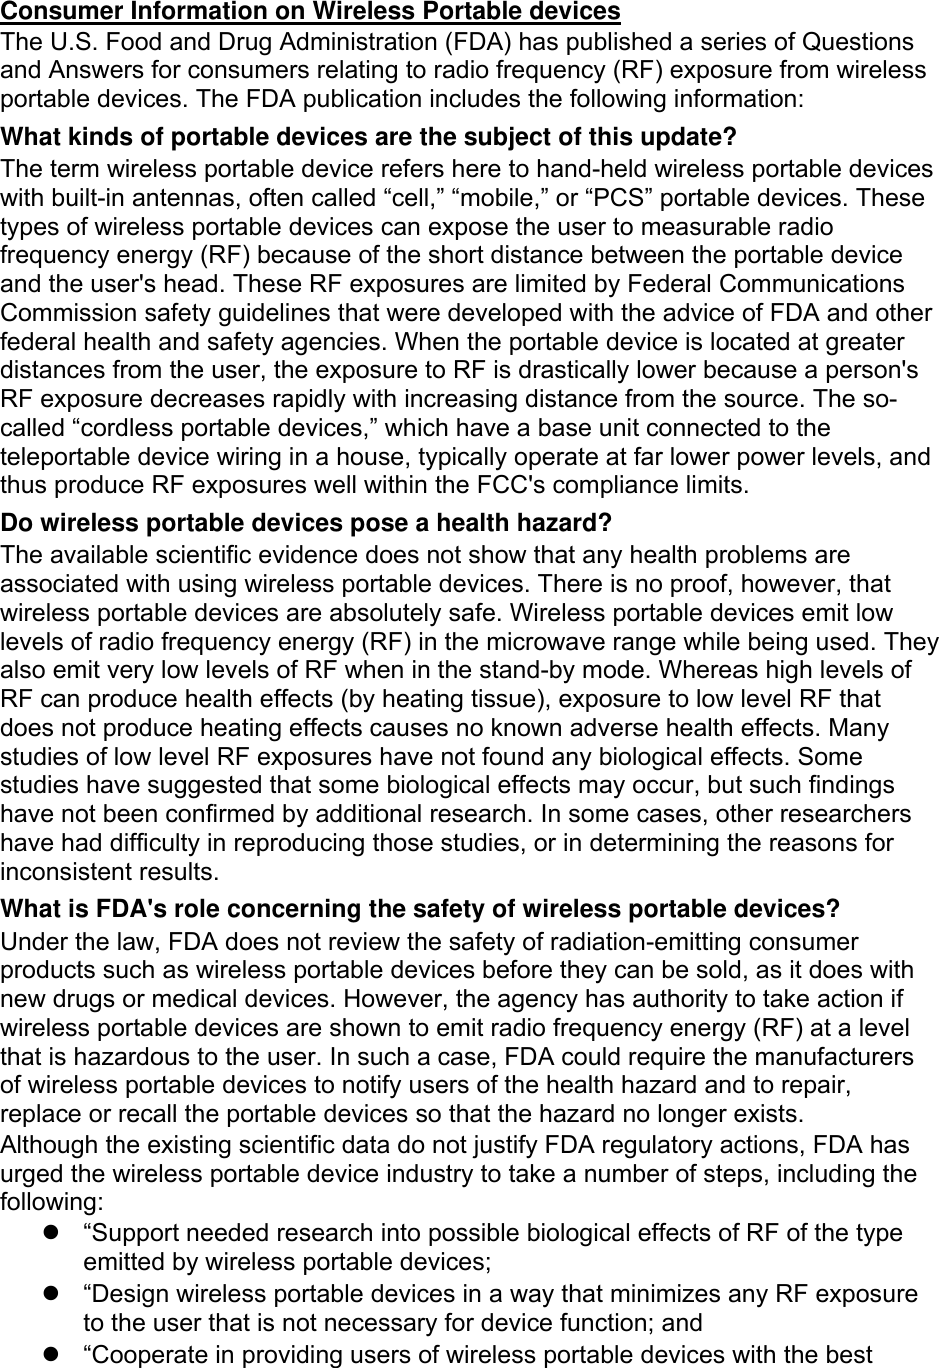  Consumer Information on Wireless Portable devices The U.S. Food and Drug Administration (FDA) has published a series of Questions and Answers for consumers relating to radio frequency (RF) exposure from wireless portable devices. The FDA publication includes the following information: What kinds of portable devices are the subject of this update? The term wireless portable device refers here to hand-held wireless portable devices with built-in antennas, often called “cell,” “mobile,” or “PCS” portable devices. These types of wireless portable devices can expose the user to measurable radio frequency energy (RF) because of the short distance between the portable device and the user&apos;s head. These RF exposures are limited by Federal Communications Commission safety guidelines that were developed with the advice of FDA and other federal health and safety agencies. When the portable device is located at greater distances from the user, the exposure to RF is drastically lower because a person&apos;s RF exposure decreases rapidly with increasing distance from the source. The so-called “cordless portable devices,” which have a base unit connected to the teleportable device wiring in a house, typically operate at far lower power levels, and thus produce RF exposures well within the FCC&apos;s compliance limits. Do wireless portable devices pose a health hazard? The available scientific evidence does not show that any health problems are associated with using wireless portable devices. There is no proof, however, that wireless portable devices are absolutely safe. Wireless portable devices emit low levels of radio frequency energy (RF) in the microwave range while being used. They also emit very low levels of RF when in the stand-by mode. Whereas high levels of RF can produce health effects (by heating tissue), exposure to low level RF that does not produce heating effects causes no known adverse health effects. Many studies of low level RF exposures have not found any biological effects. Some studies have suggested that some biological effects may occur, but such findings have not been confirmed by additional research. In some cases, other researchers have had difficulty in reproducing those studies, or in determining the reasons for inconsistent results. What is FDA&apos;s role concerning the safety of wireless portable devices? Under the law, FDA does not review the safety of radiation-emitting consumer products such as wireless portable devices before they can be sold, as it does with new drugs or medical devices. However, the agency has authority to take action if wireless portable devices are shown to emit radio frequency energy (RF) at a level that is hazardous to the user. In such a case, FDA could require the manufacturers of wireless portable devices to notify users of the health hazard and to repair, replace or recall the portable devices so that the hazard no longer exists. Although the existing scientific data do not justify FDA regulatory actions, FDA has urged the wireless portable device industry to take a number of steps, including the following:   “Support needed research into possible biological effects of RF of the type emitted by wireless portable devices;   “Design wireless portable devices in a way that minimizes any RF exposure to the user that is not necessary for device function; and   “Cooperate in providing users of wireless portable devices with the best 